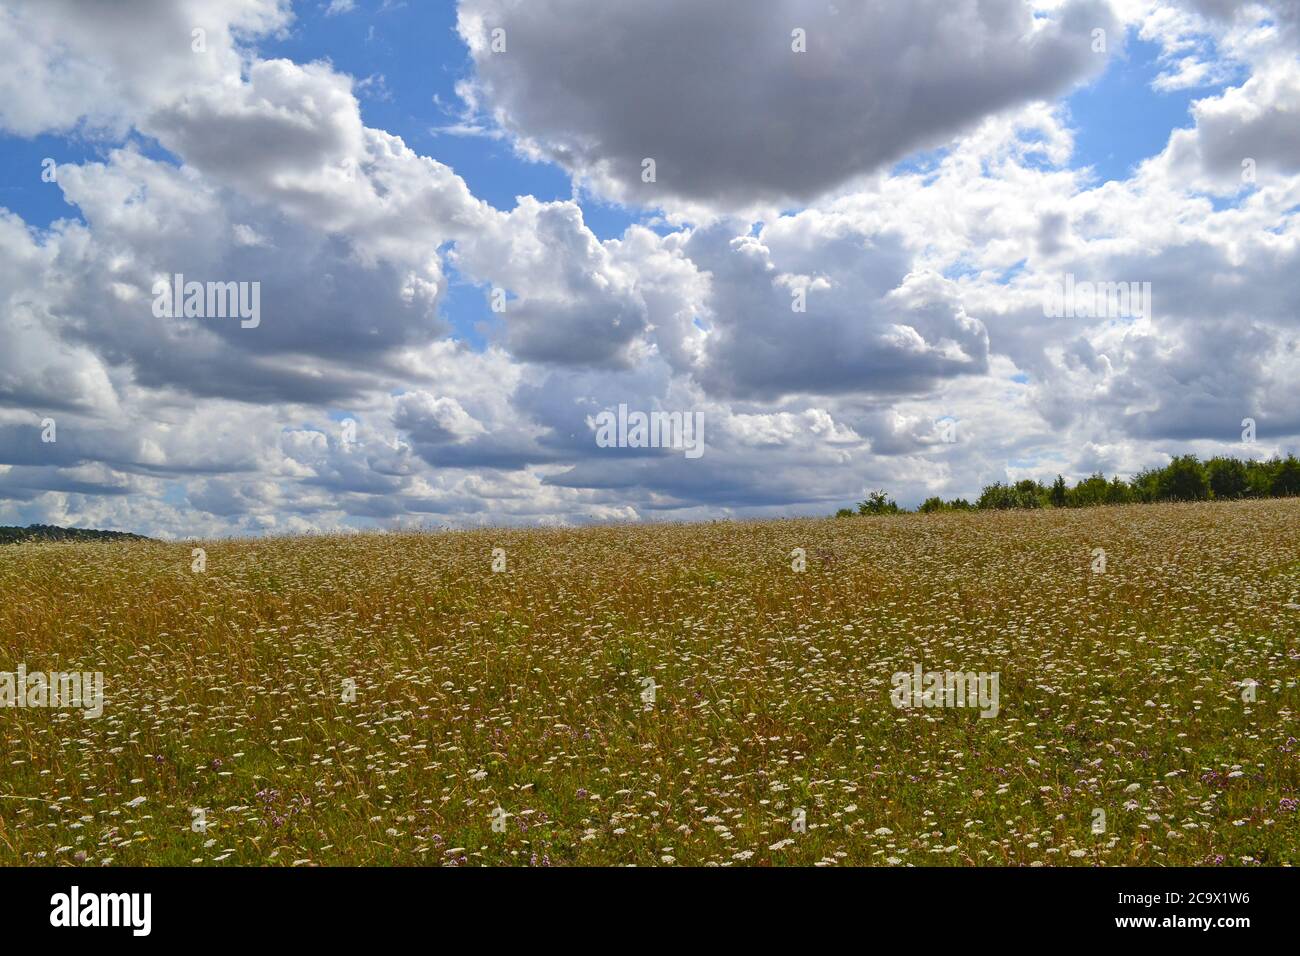 Wild carrot, majoram, growing in rewilded meadows at Lullingstone Country Park near Sevenoaks and Eynsford, Kent, England, in August as cumulus clouds Stock Photo